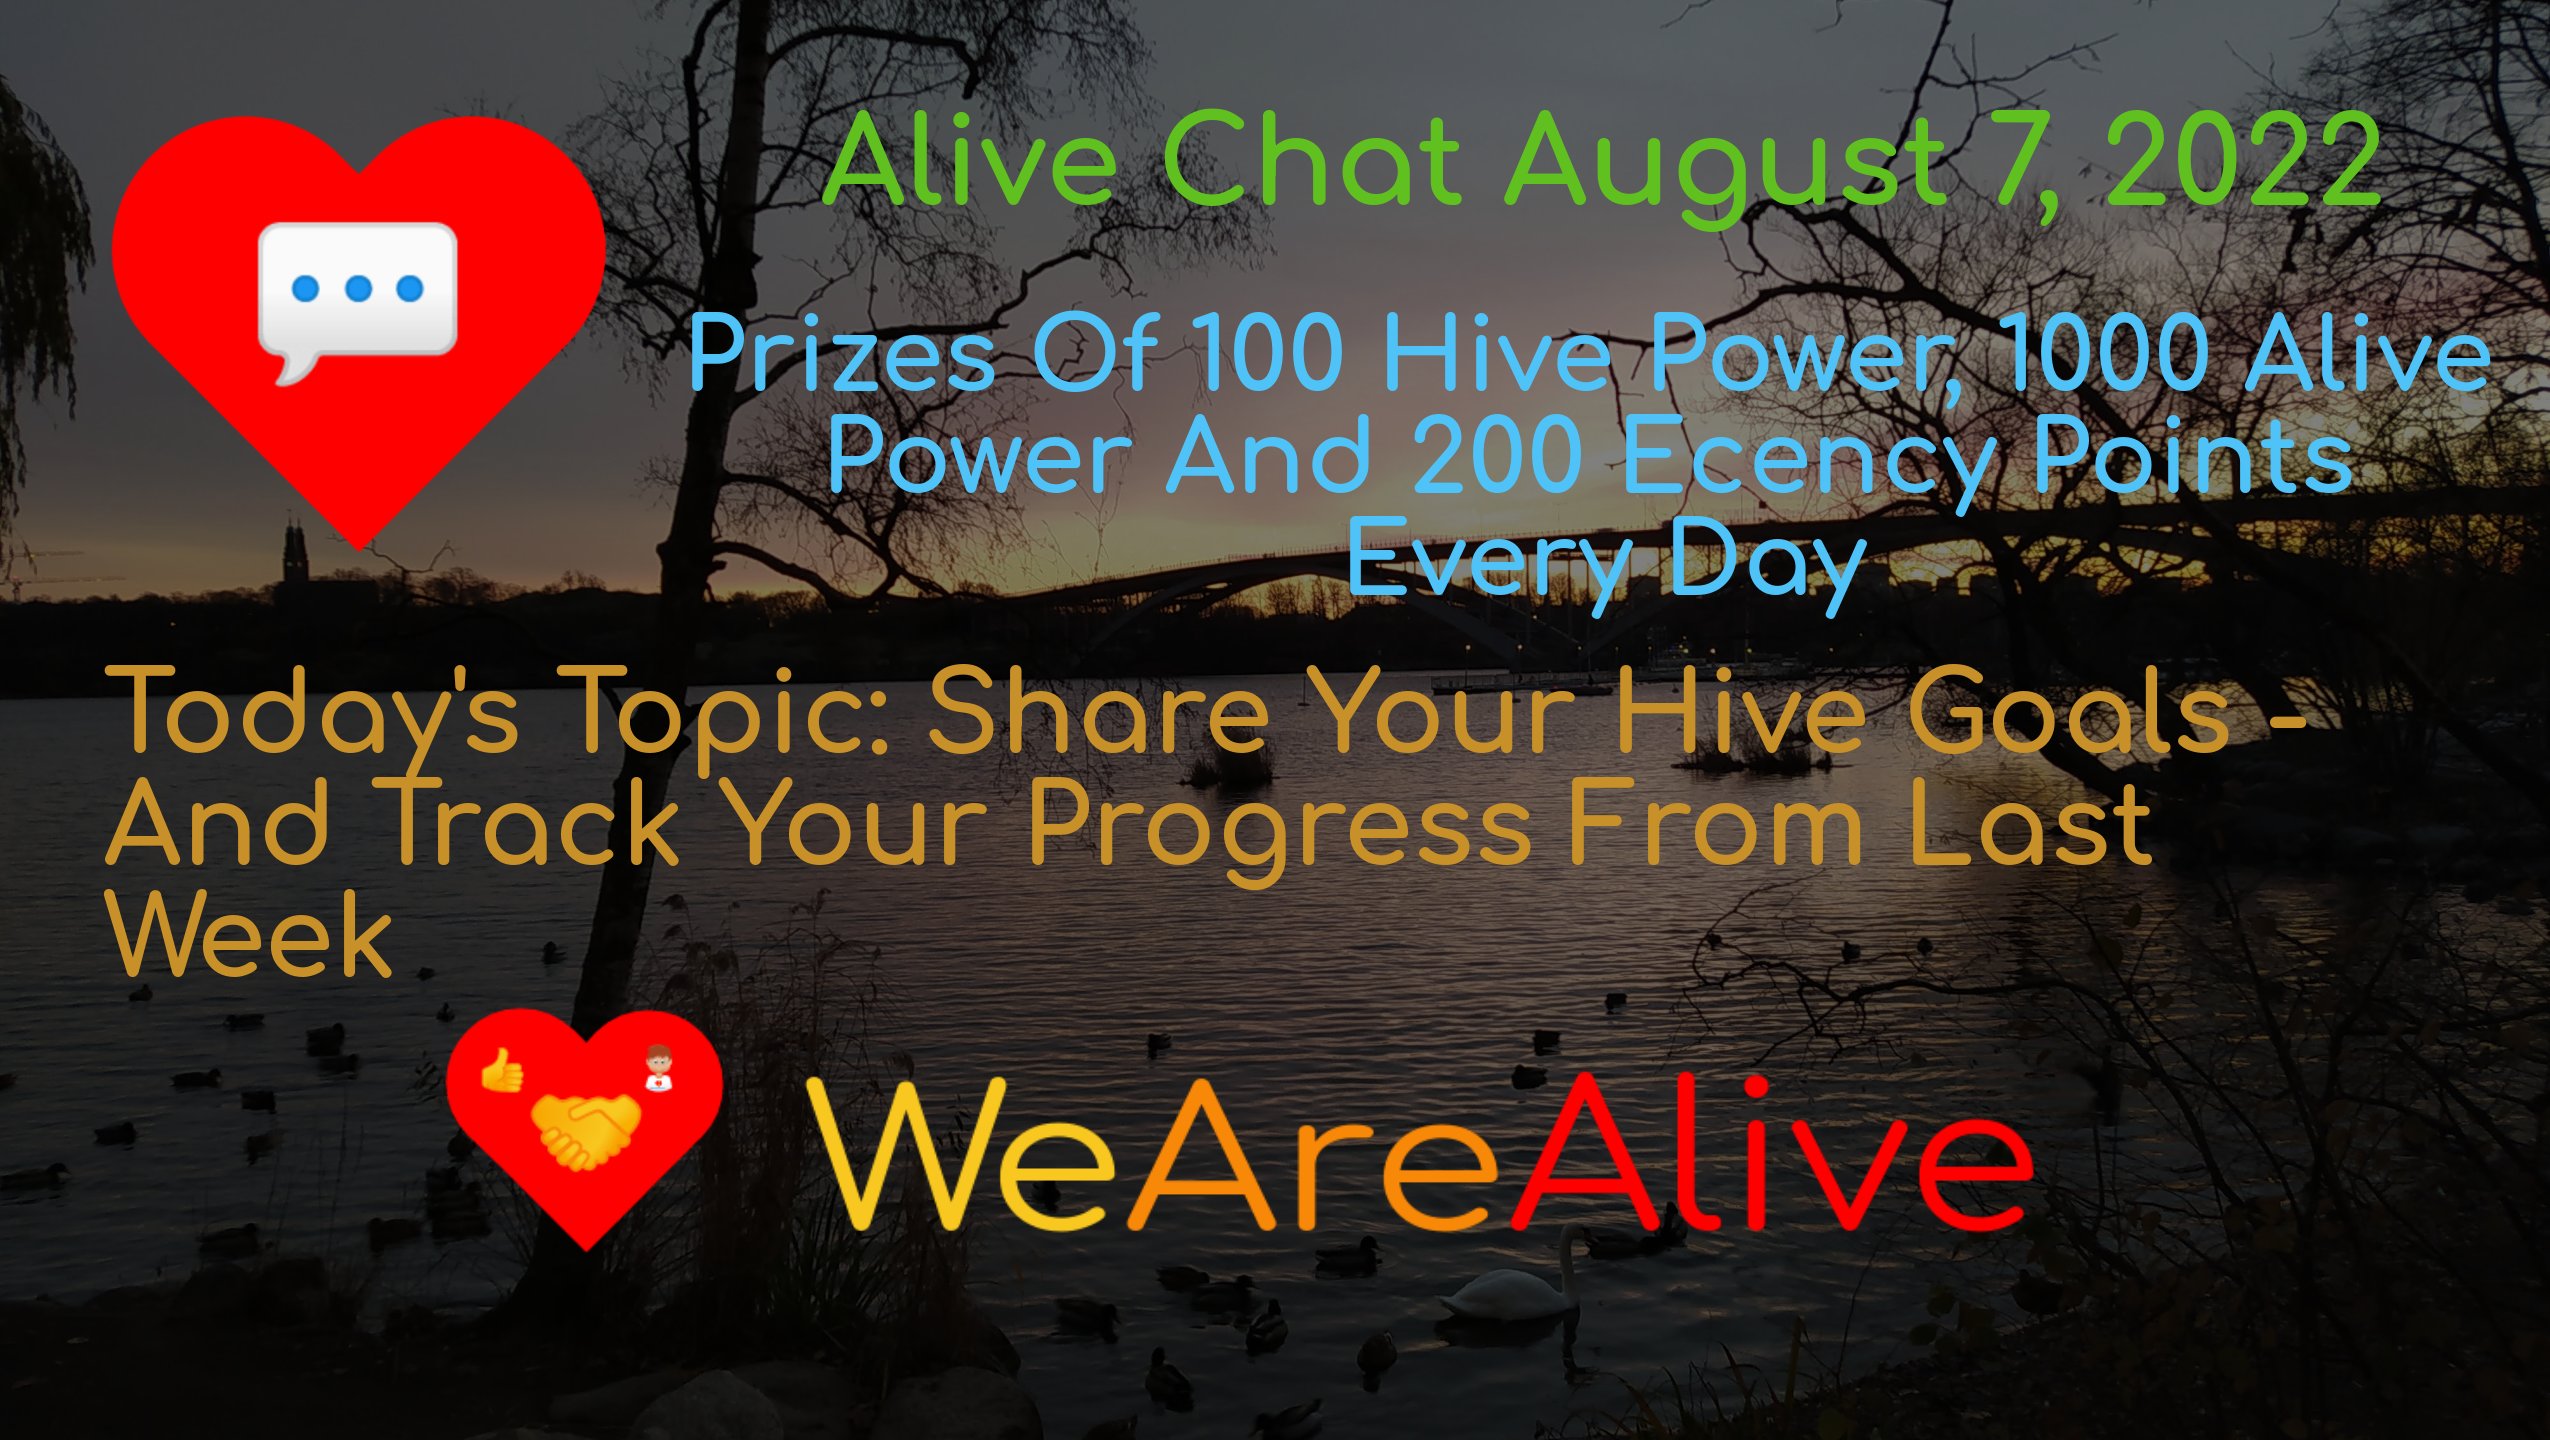 @alive.chat/alive-chat-august-7-2022-daily-prize-drawing-open-for-entries-todays-topic-share-your-hive-goals-and-track-your-progress-from-